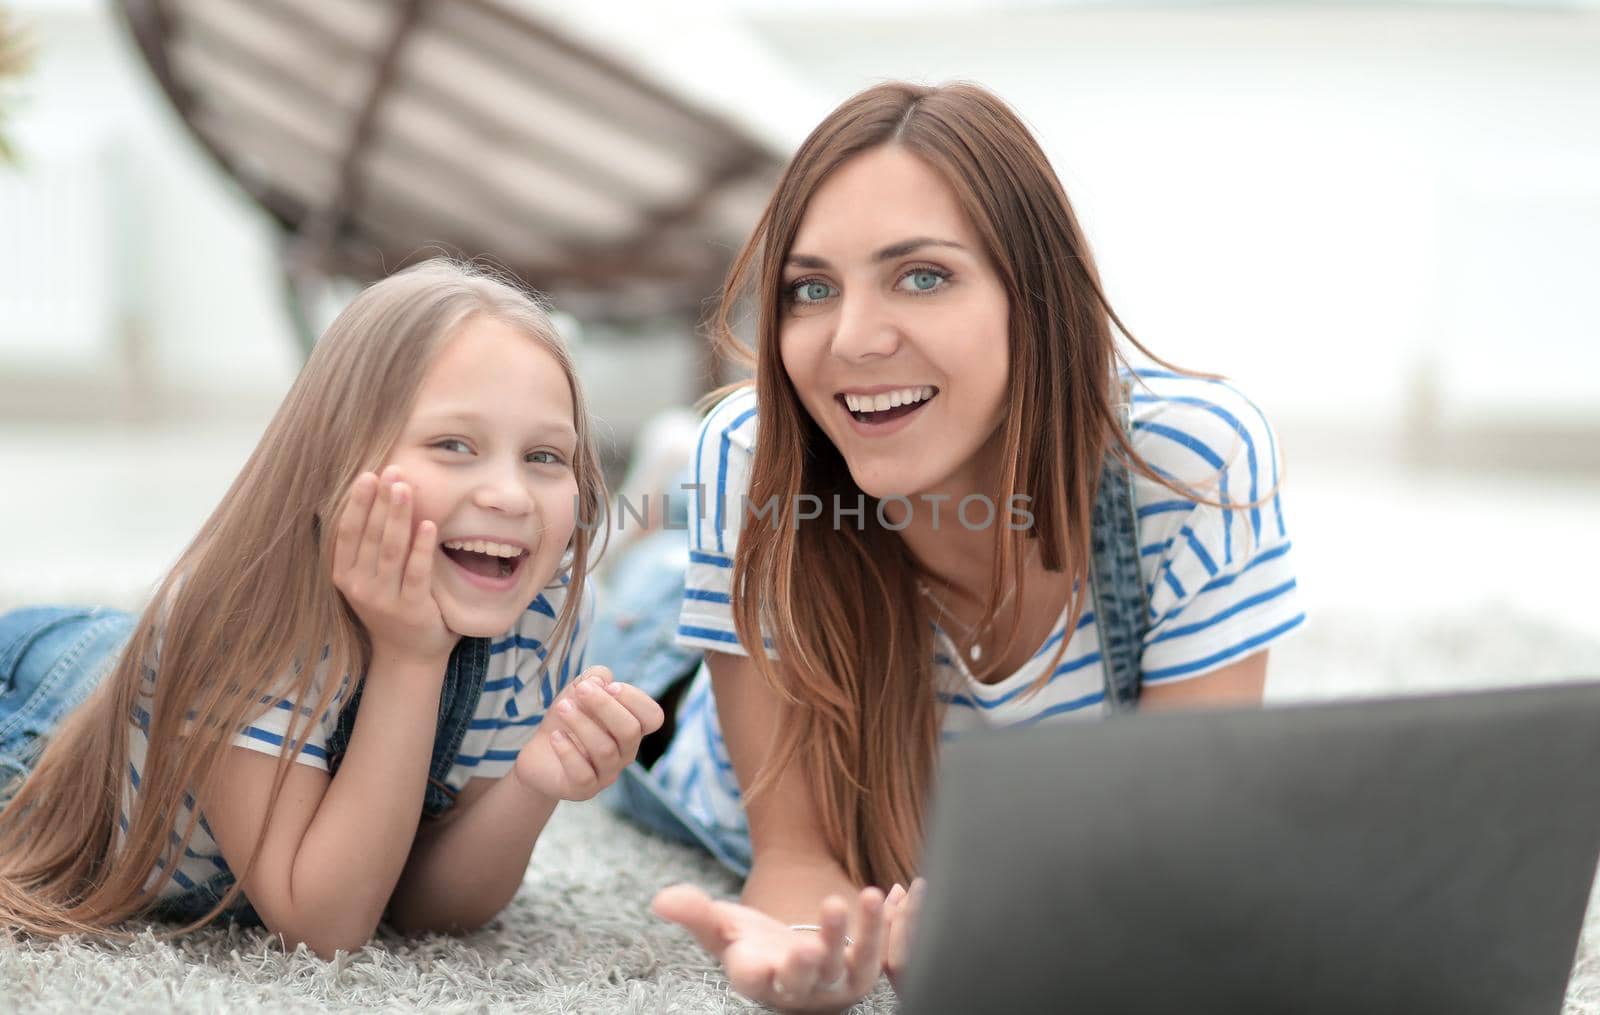 smiling mother and daughter spend their free time together.people and technology